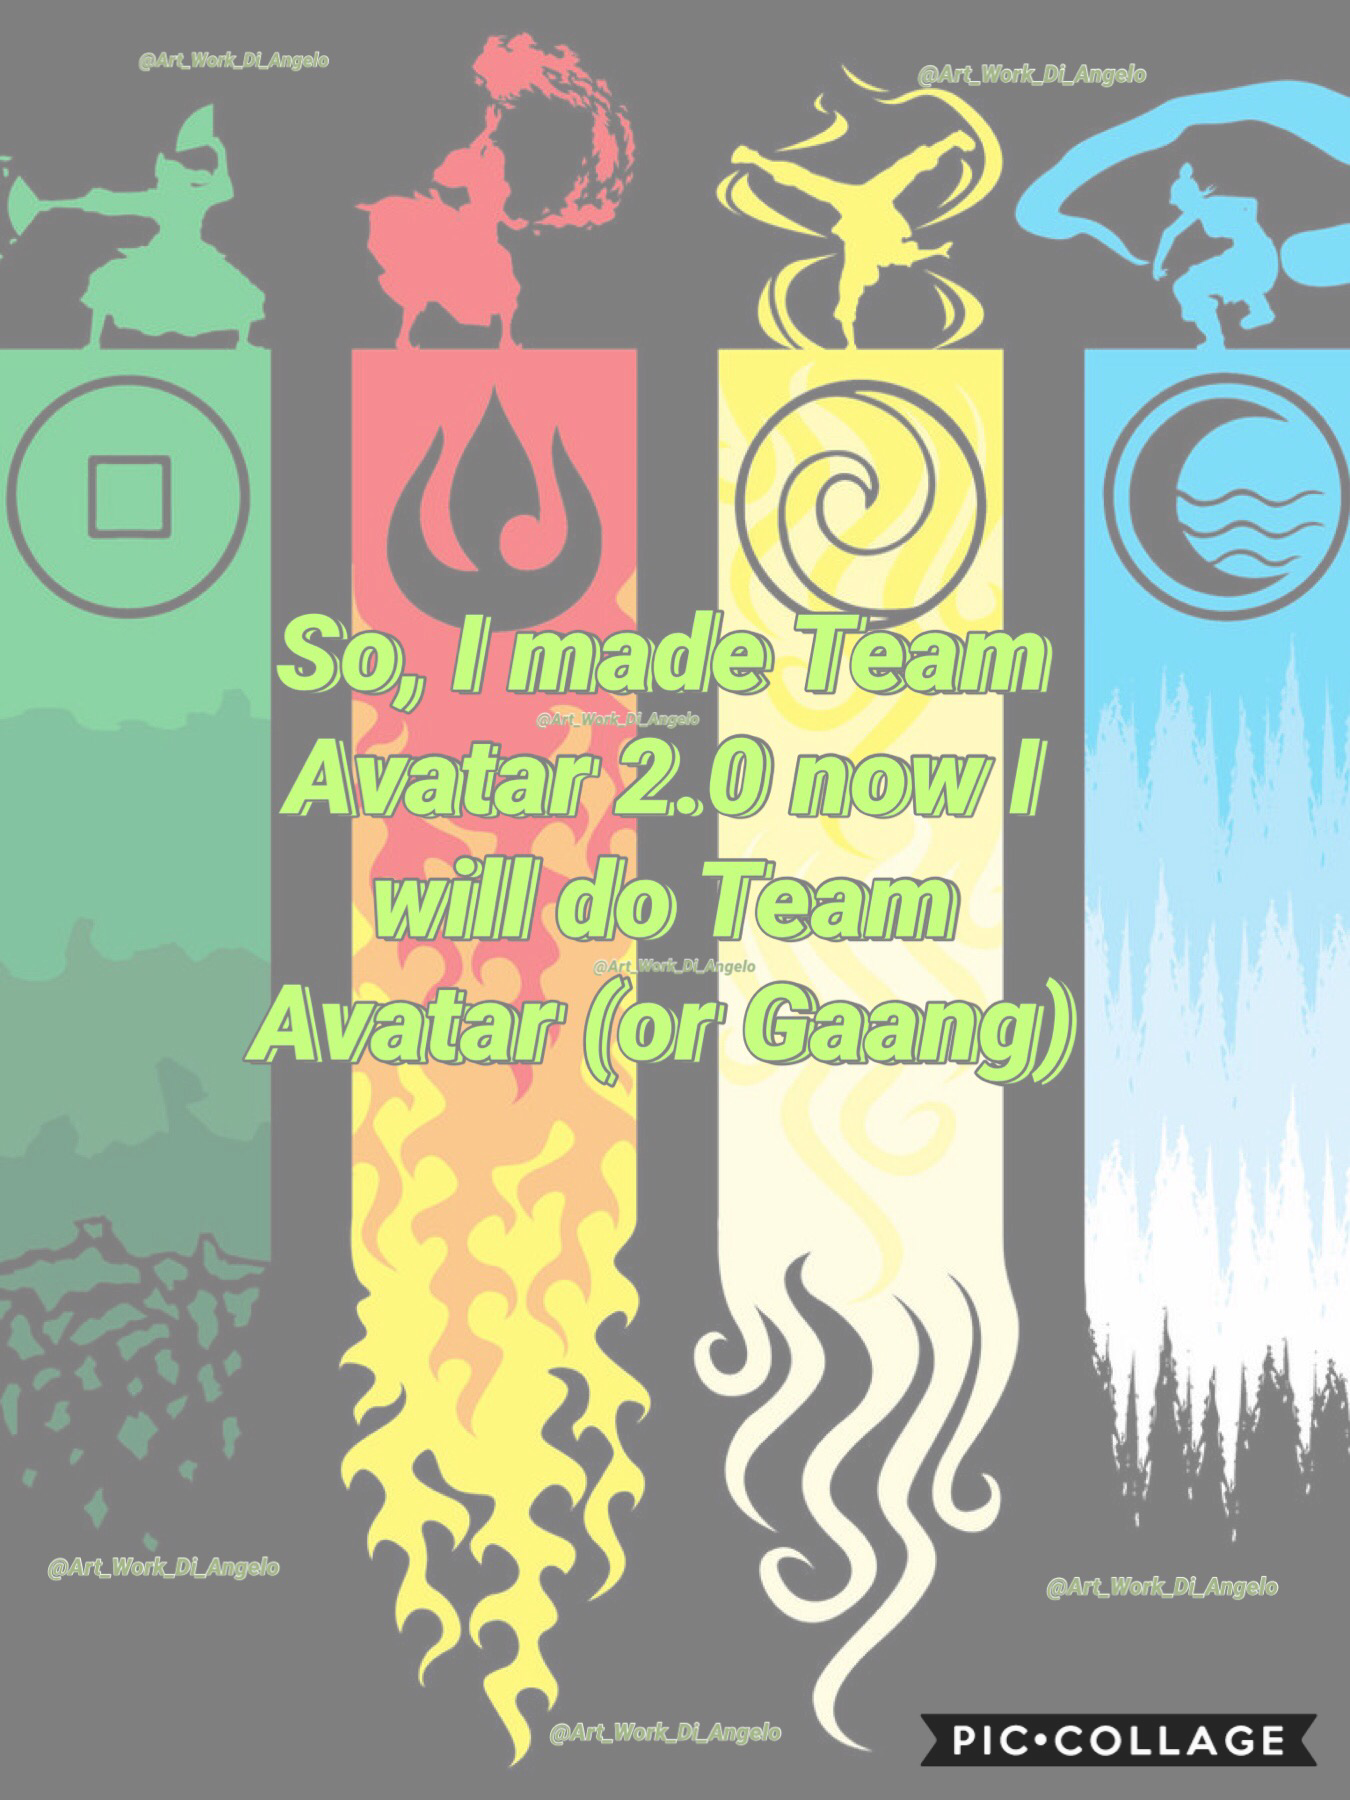 The next person on team avatar will be somebody...